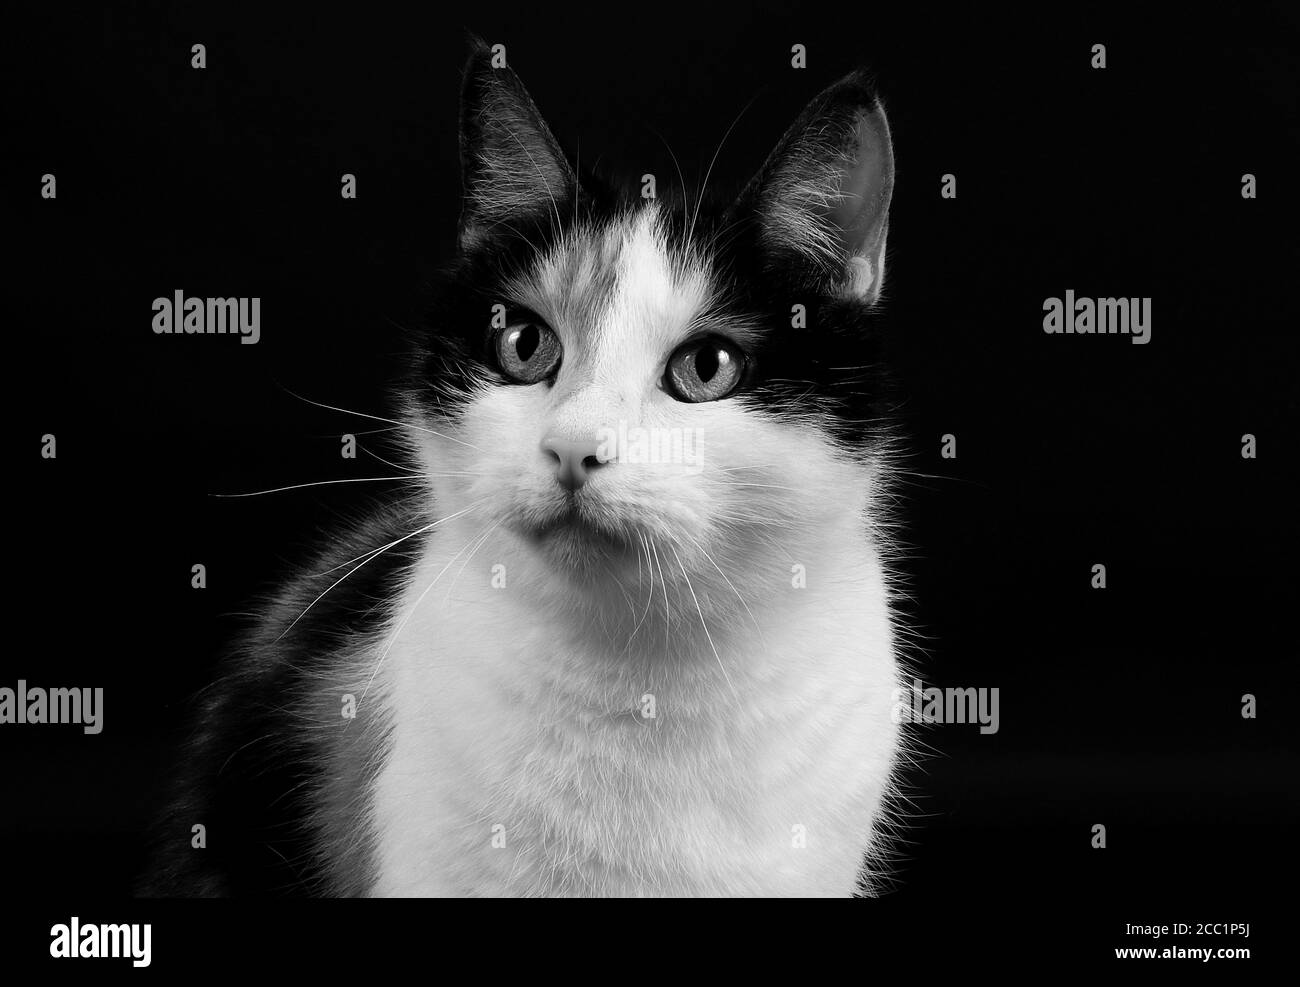 Isolated grayscale closeup shot of a calico cat's face Stock Photo